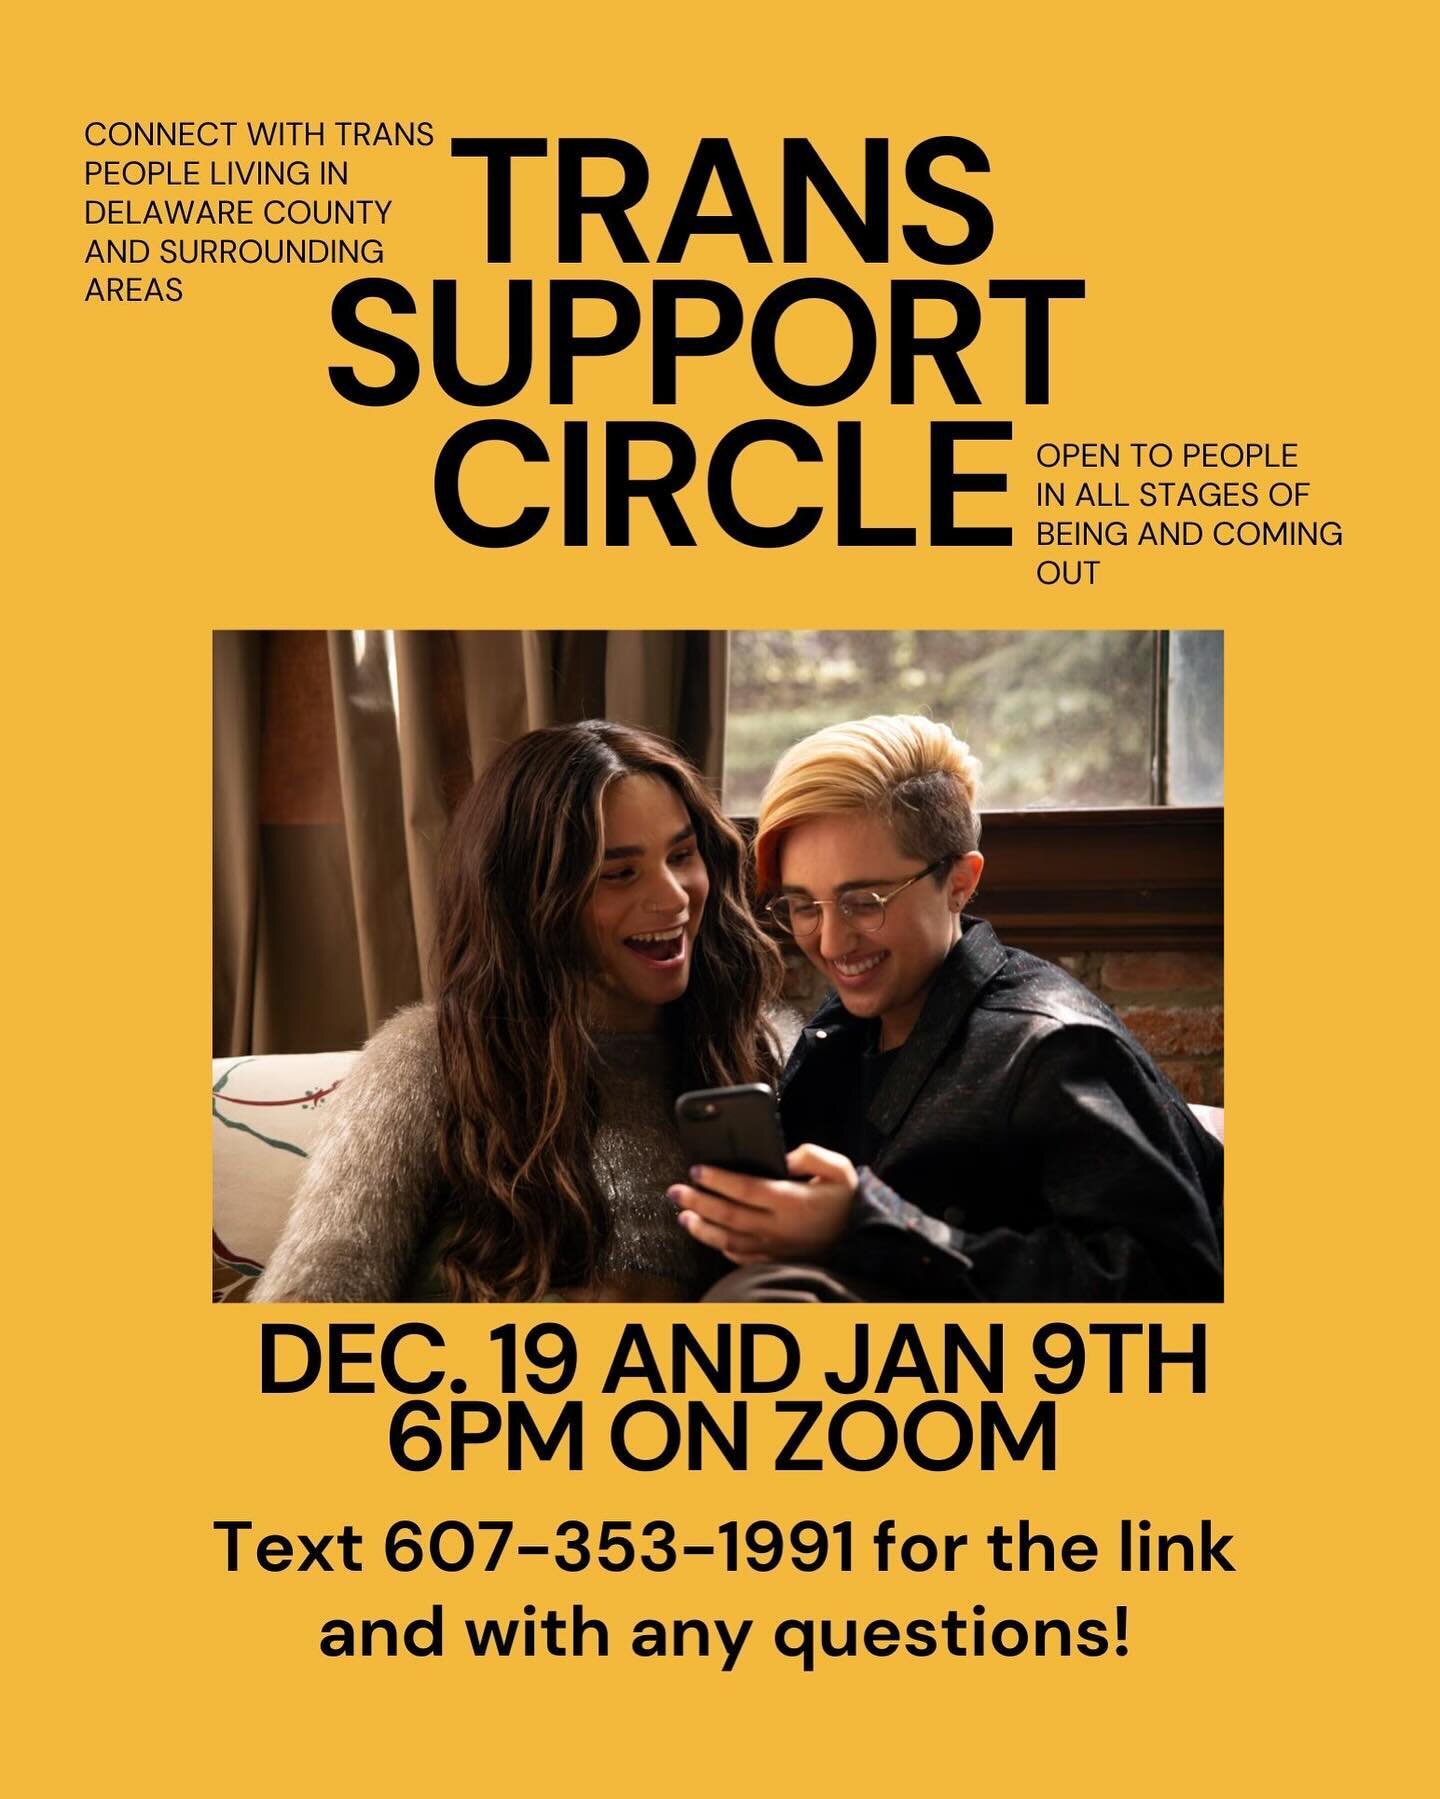 Trans Support Circle- connecting trans people living in Delaware County and the surrounding areas. 

Join us at 6pm on December 19 and January 9!  #lgbt #ruralqueers #transsupport